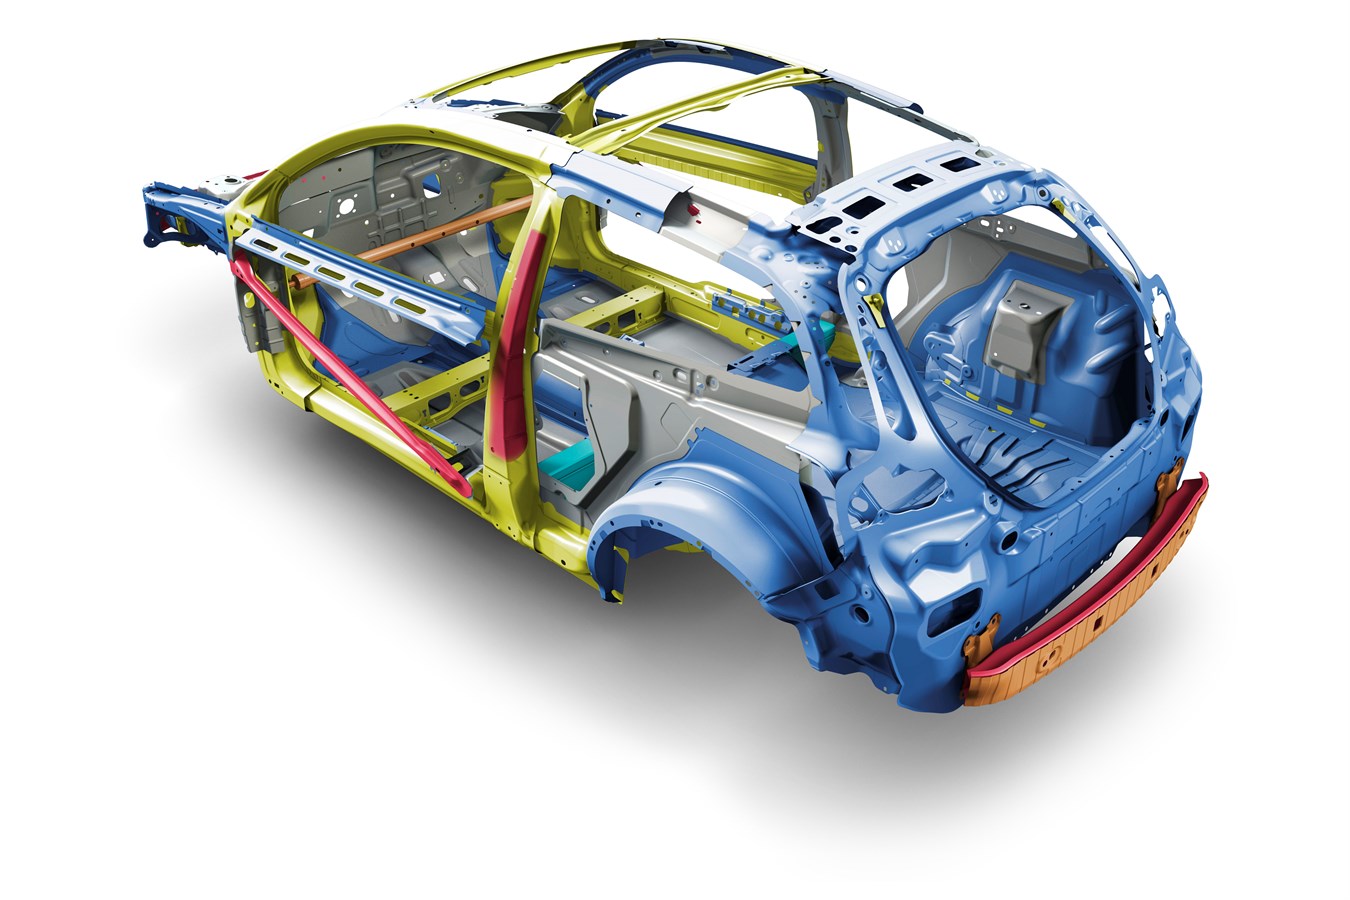 Volvo C30's frame and interior safety structures.